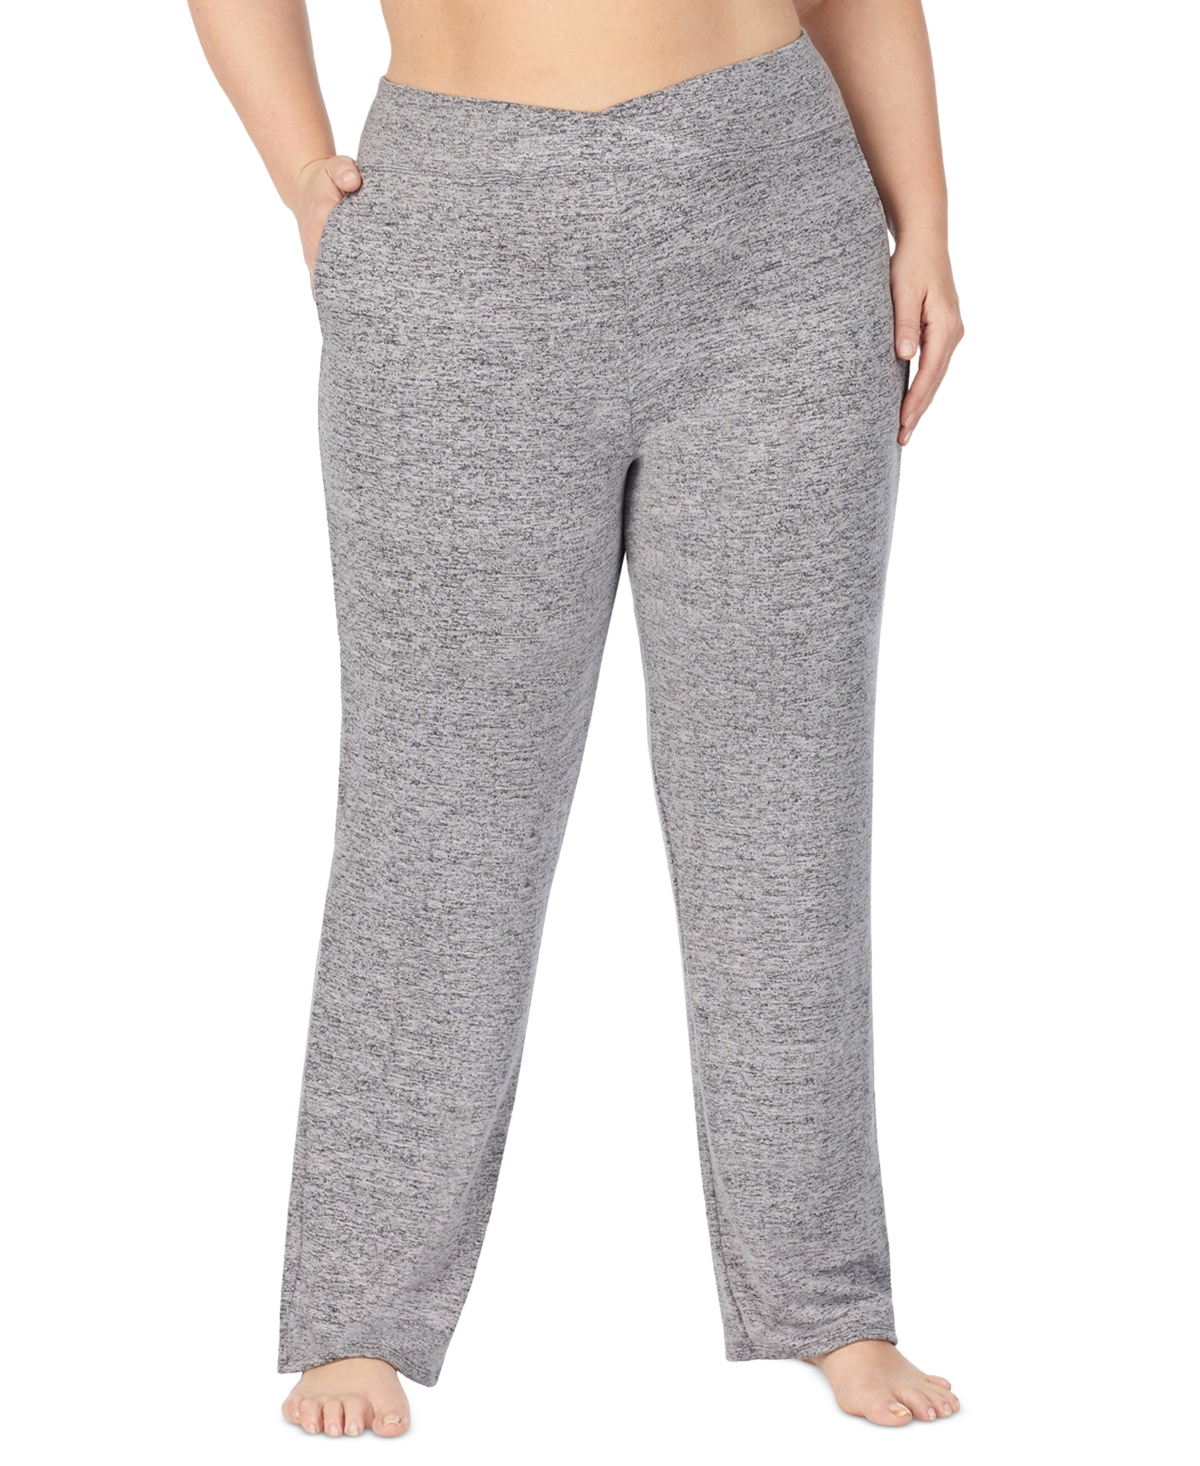 Cuddl Duds Plus Size Soft Knit Mid-Rise Lounge Pants - Marled Dark Charcoal